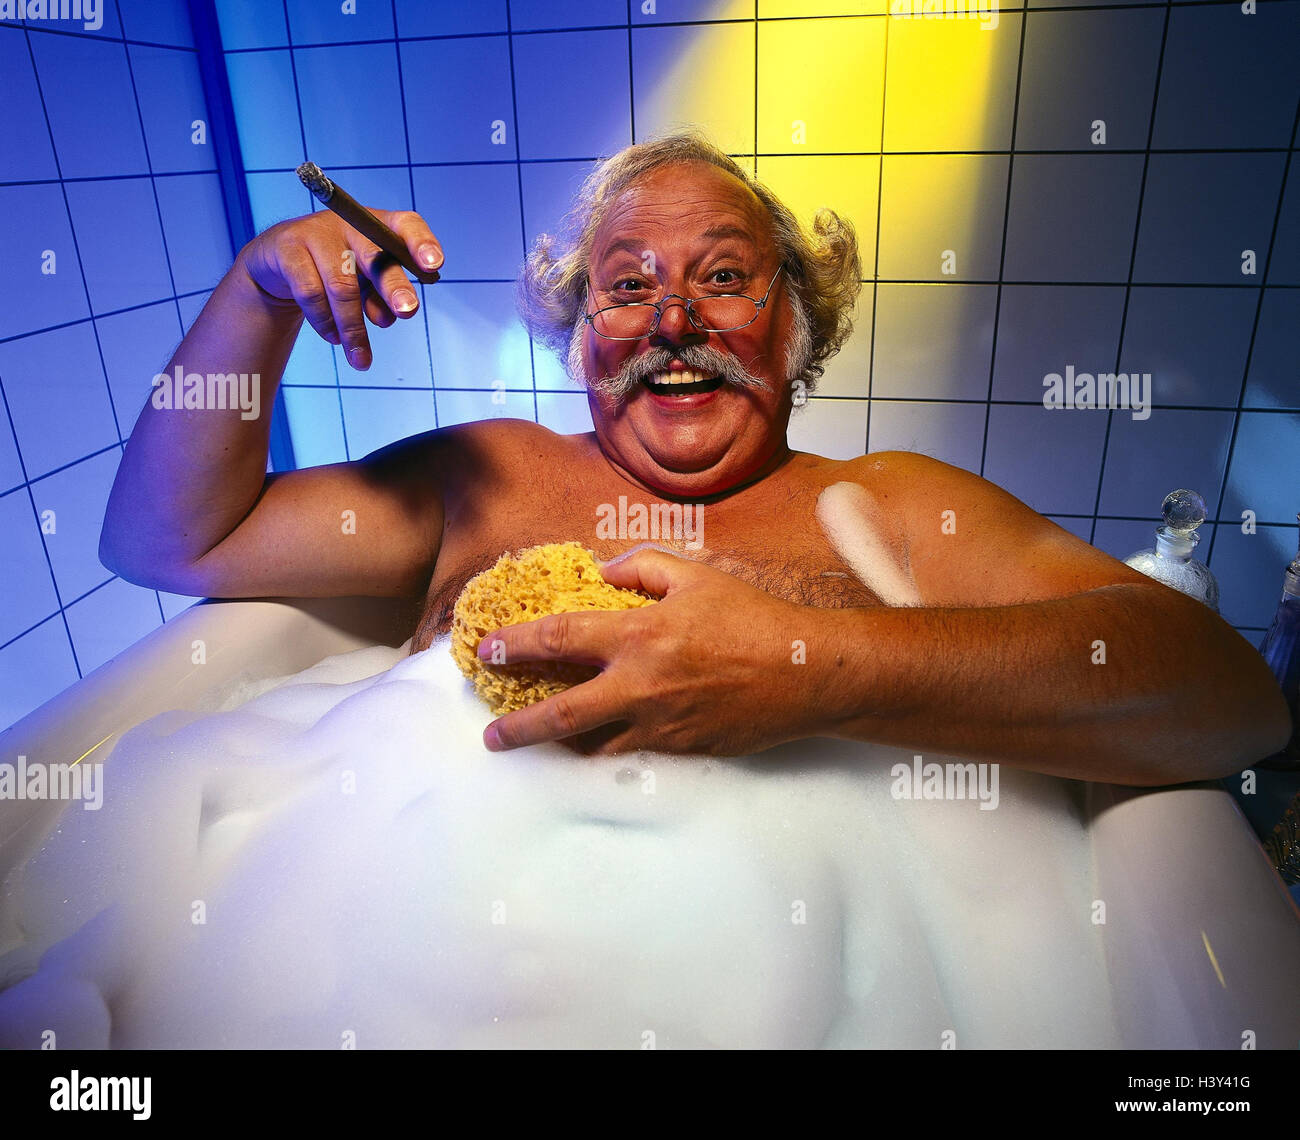 Bath, senior, moustache, cigar, smoke, inside, bath, proper bath, bubble bath, have of a bath, personal care, glasses, grey-haired, hairs, grey, happy, melted, luxury, care, hygiene, body hygiene, relaxing, recover, take it easy, well-being, feeling well- Stock Photo